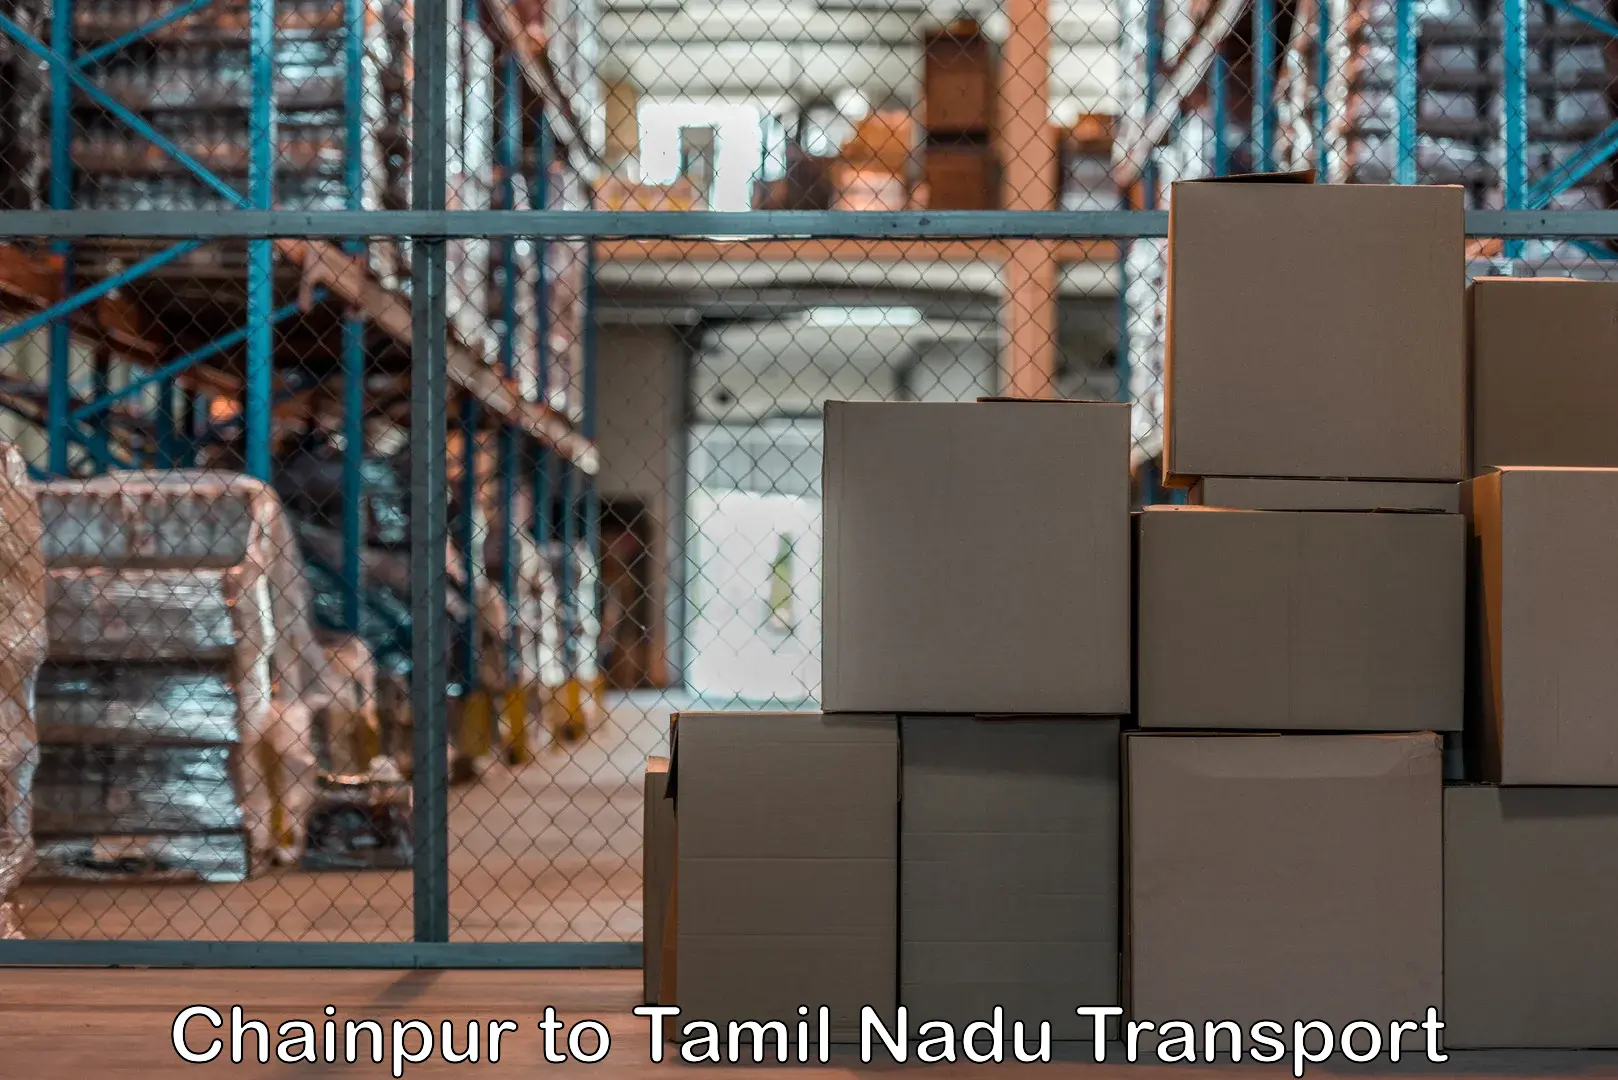 Road transport online services in Chainpur to Tirunelveli